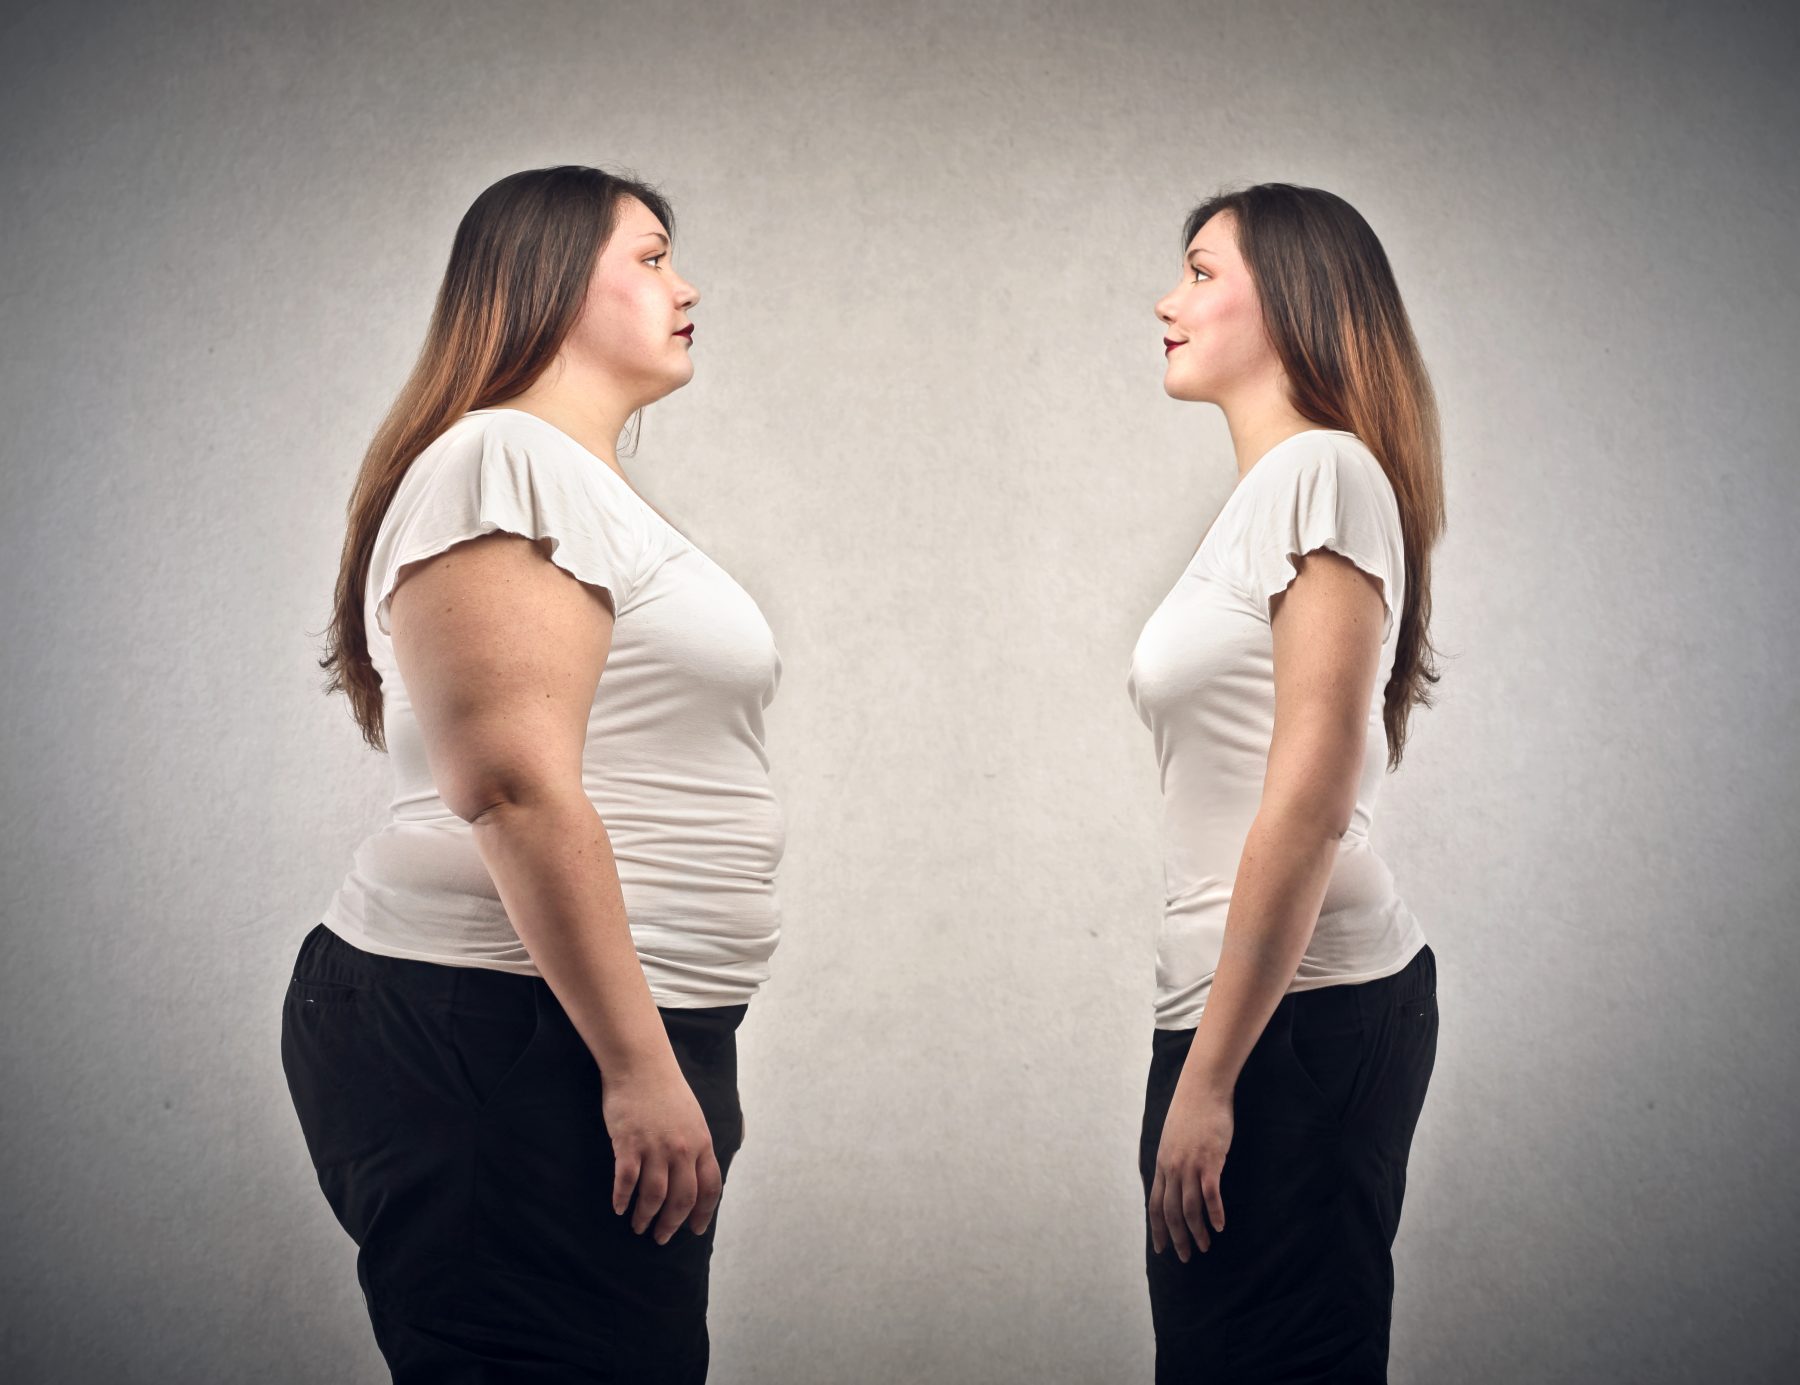 Mirror image of a woman, one normal and healthy, the other before she lost weight